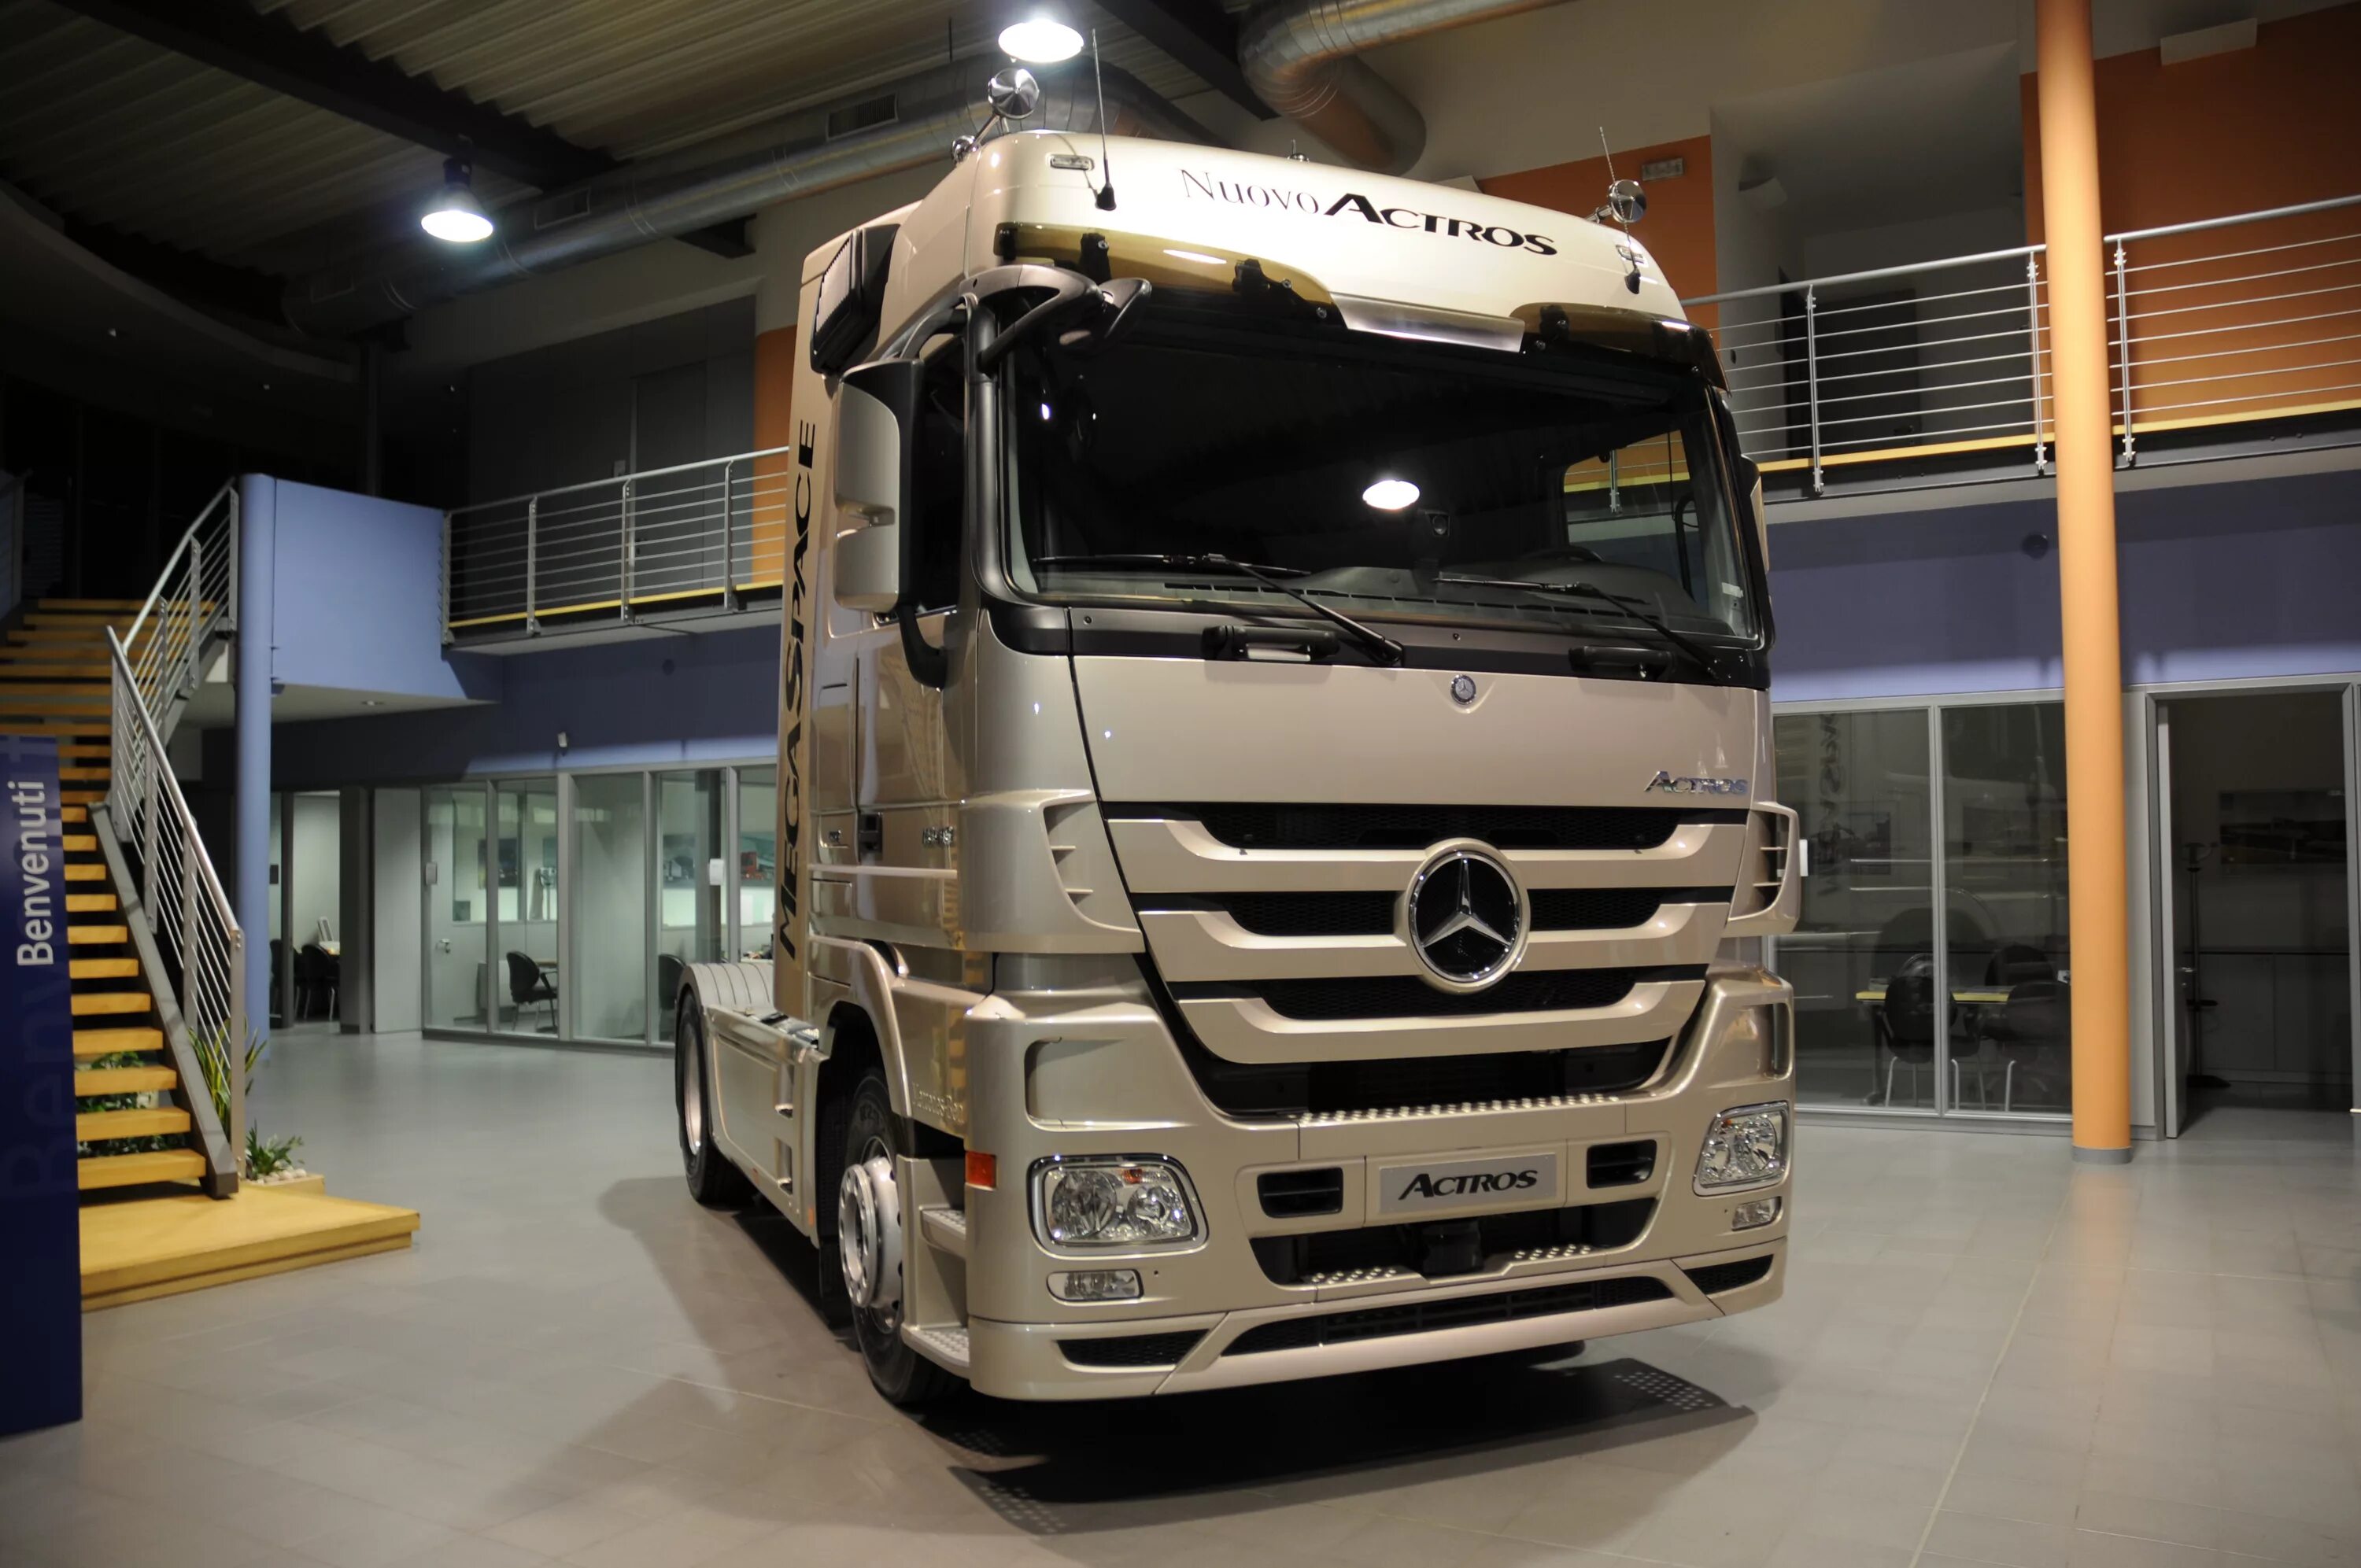 Mercedes mp. Мерседес Бенц Актрос. Mercedes Actros 3. Мерседес Актрос мп5. Mercedes-Benz Actros 1863.